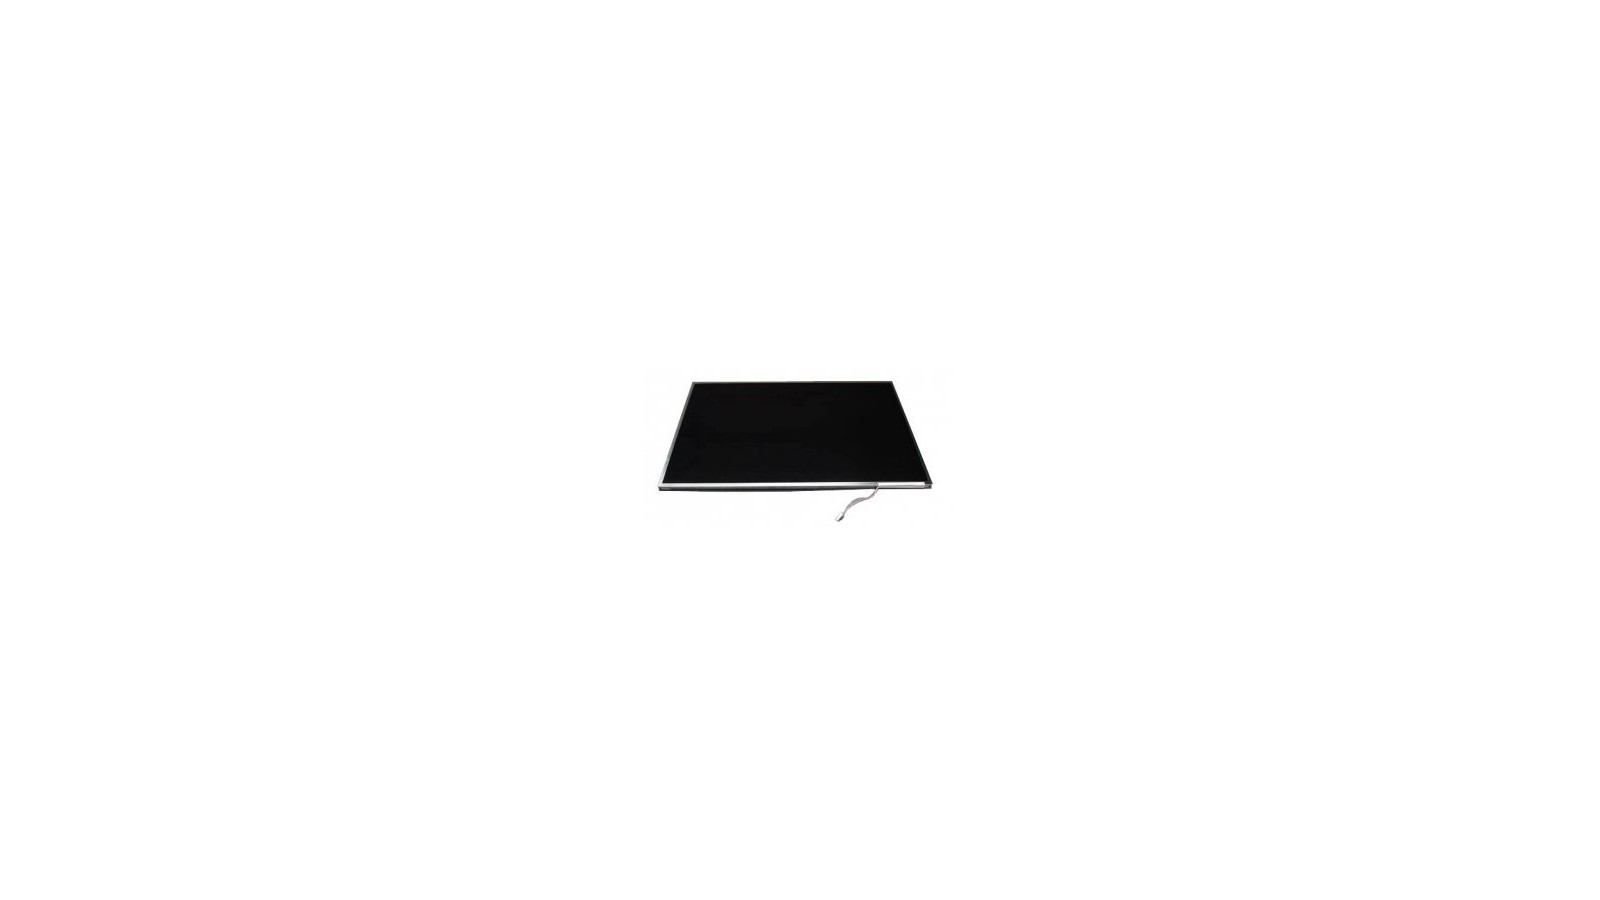 Display monitor lcd 17 Acer Aspire 9503 9504 9502 9410z